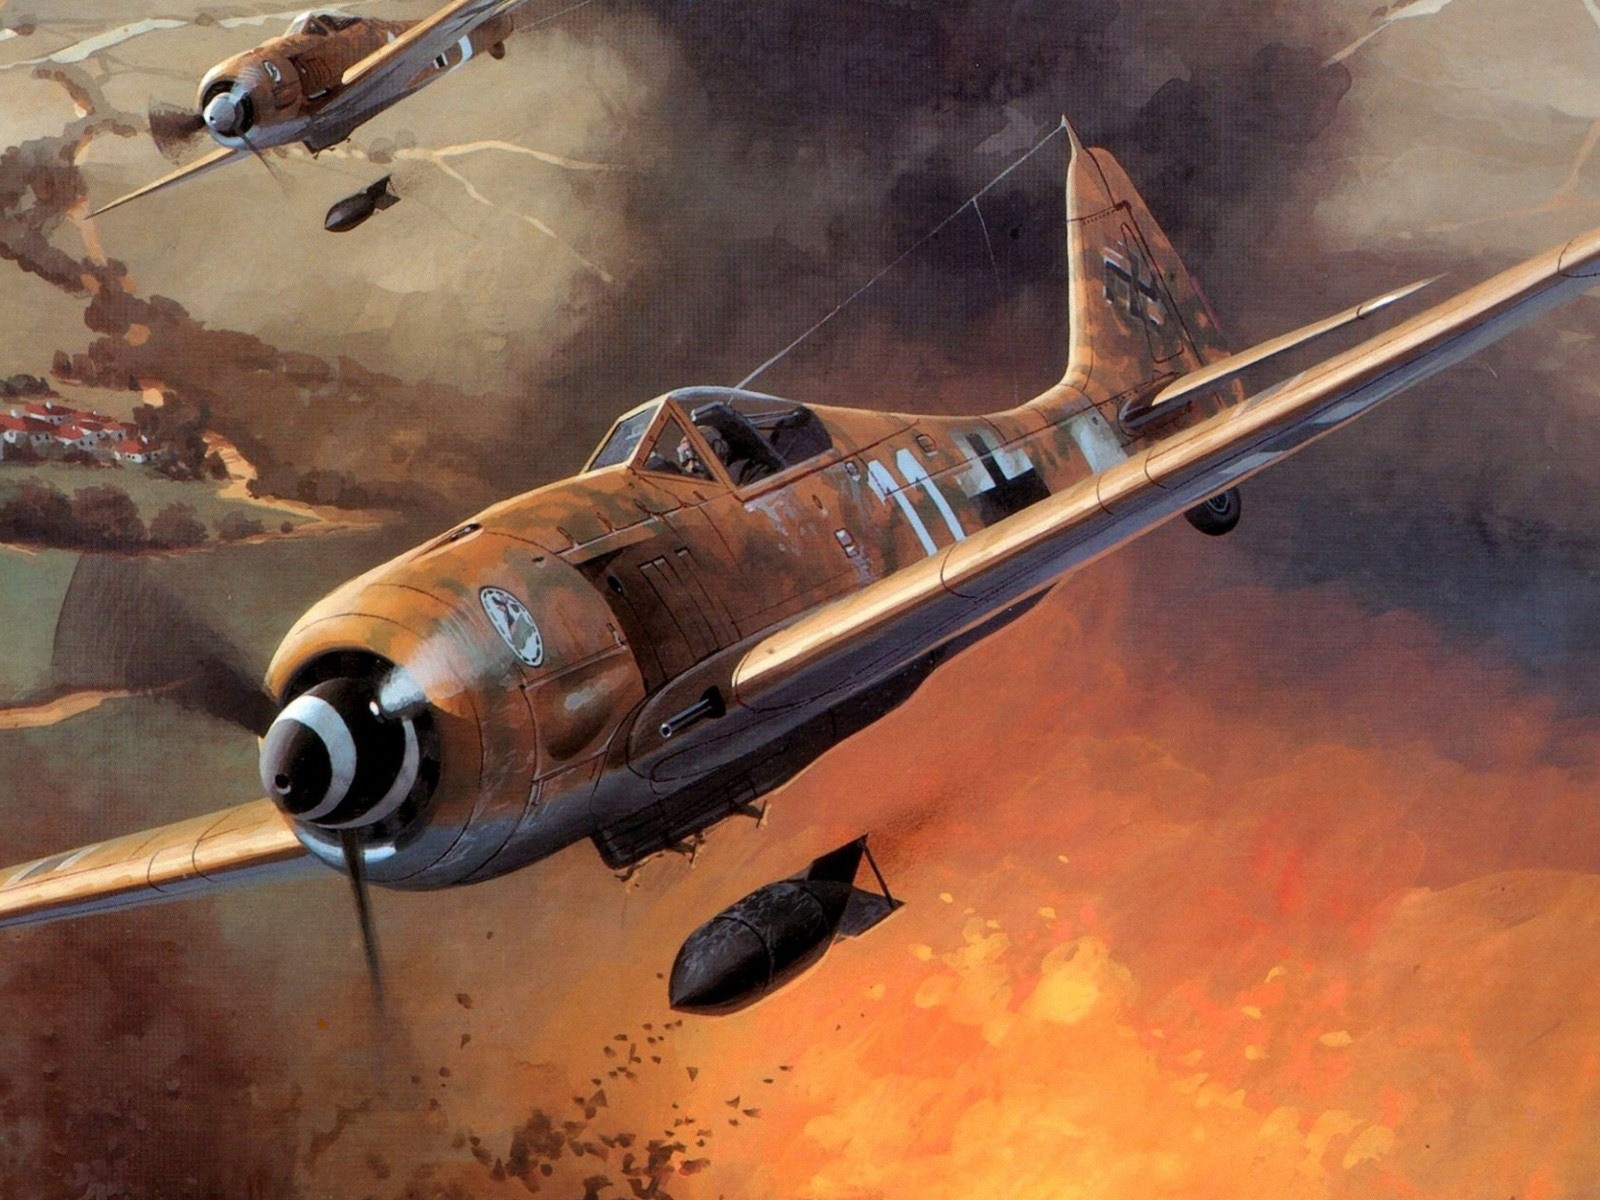 Military aircraft flight exquisite painting wallpapers #6 - 1600x1200